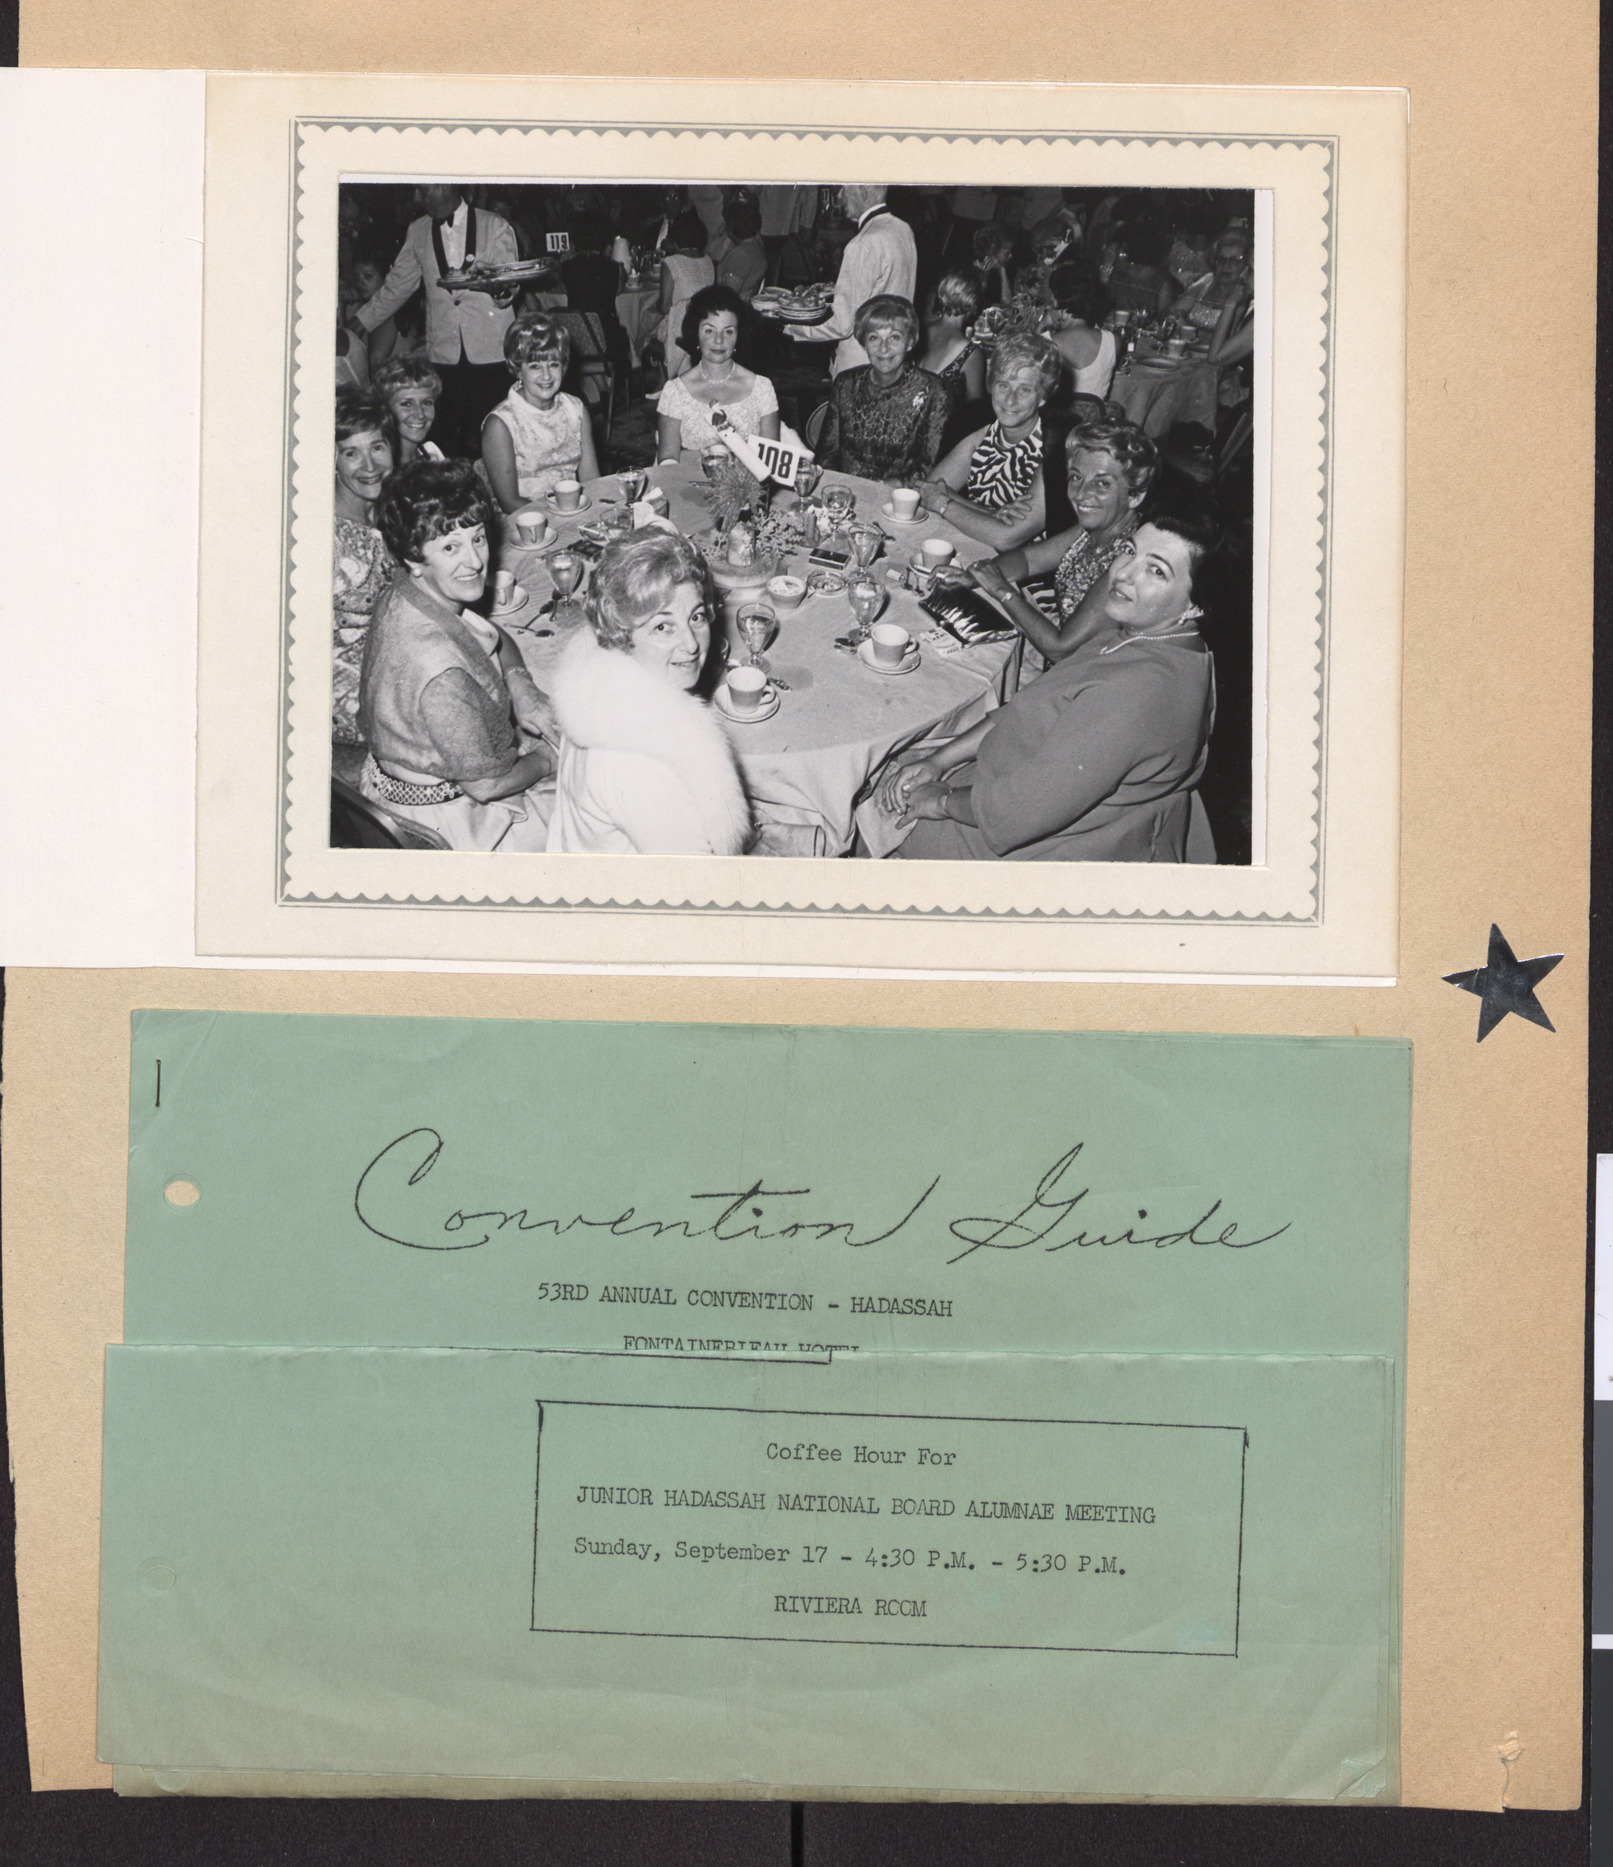 Photograph of Group of Hadassah members around a table, and Guide to the Hadassah Annual Convention (folded)